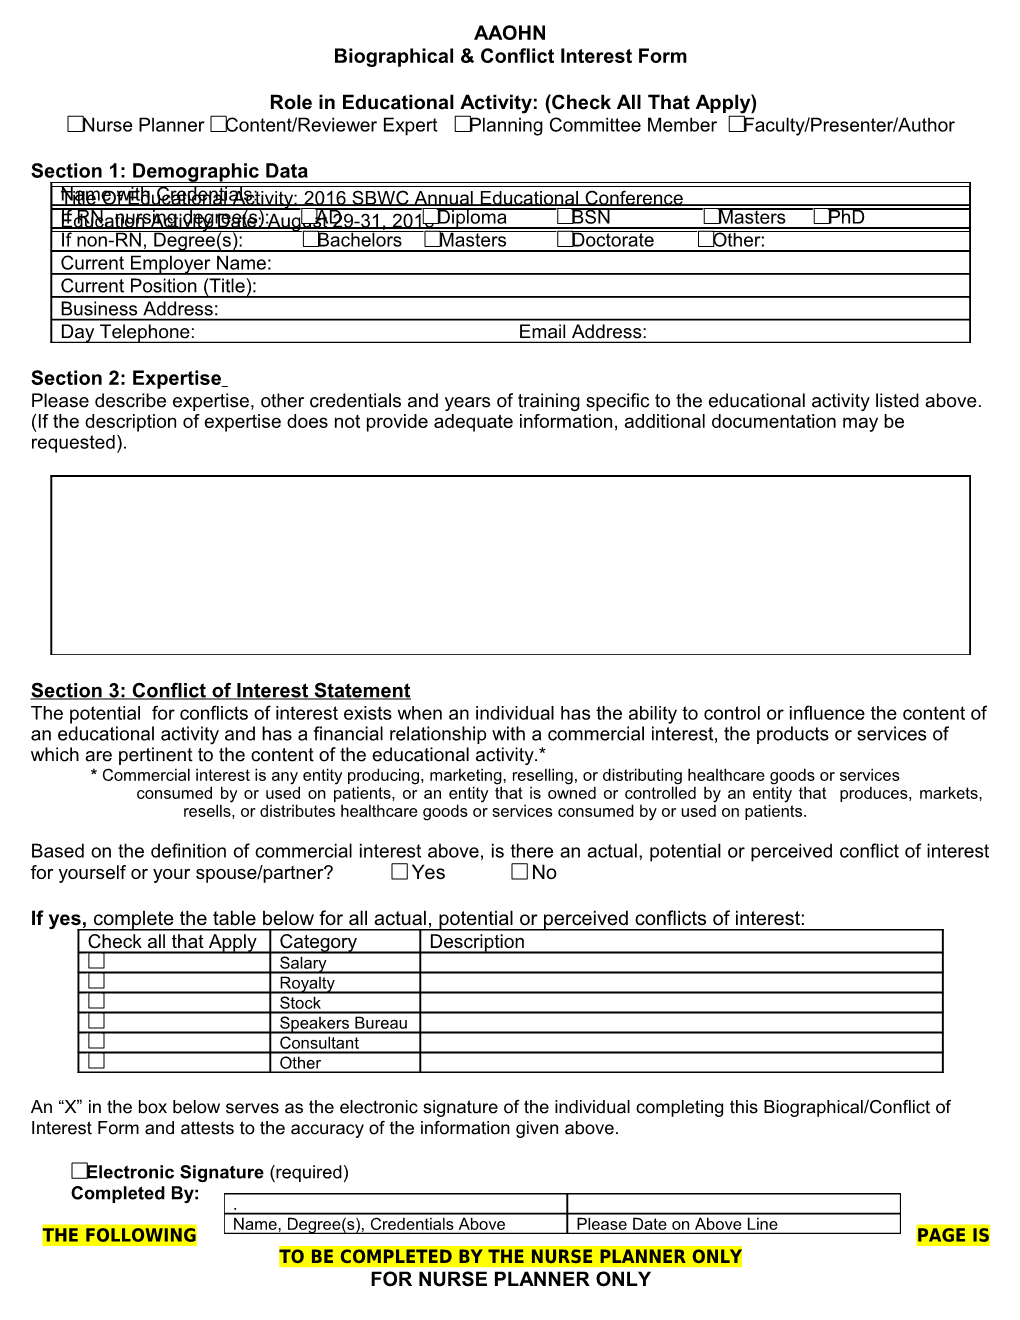 Biographical & Conflict Interest Form